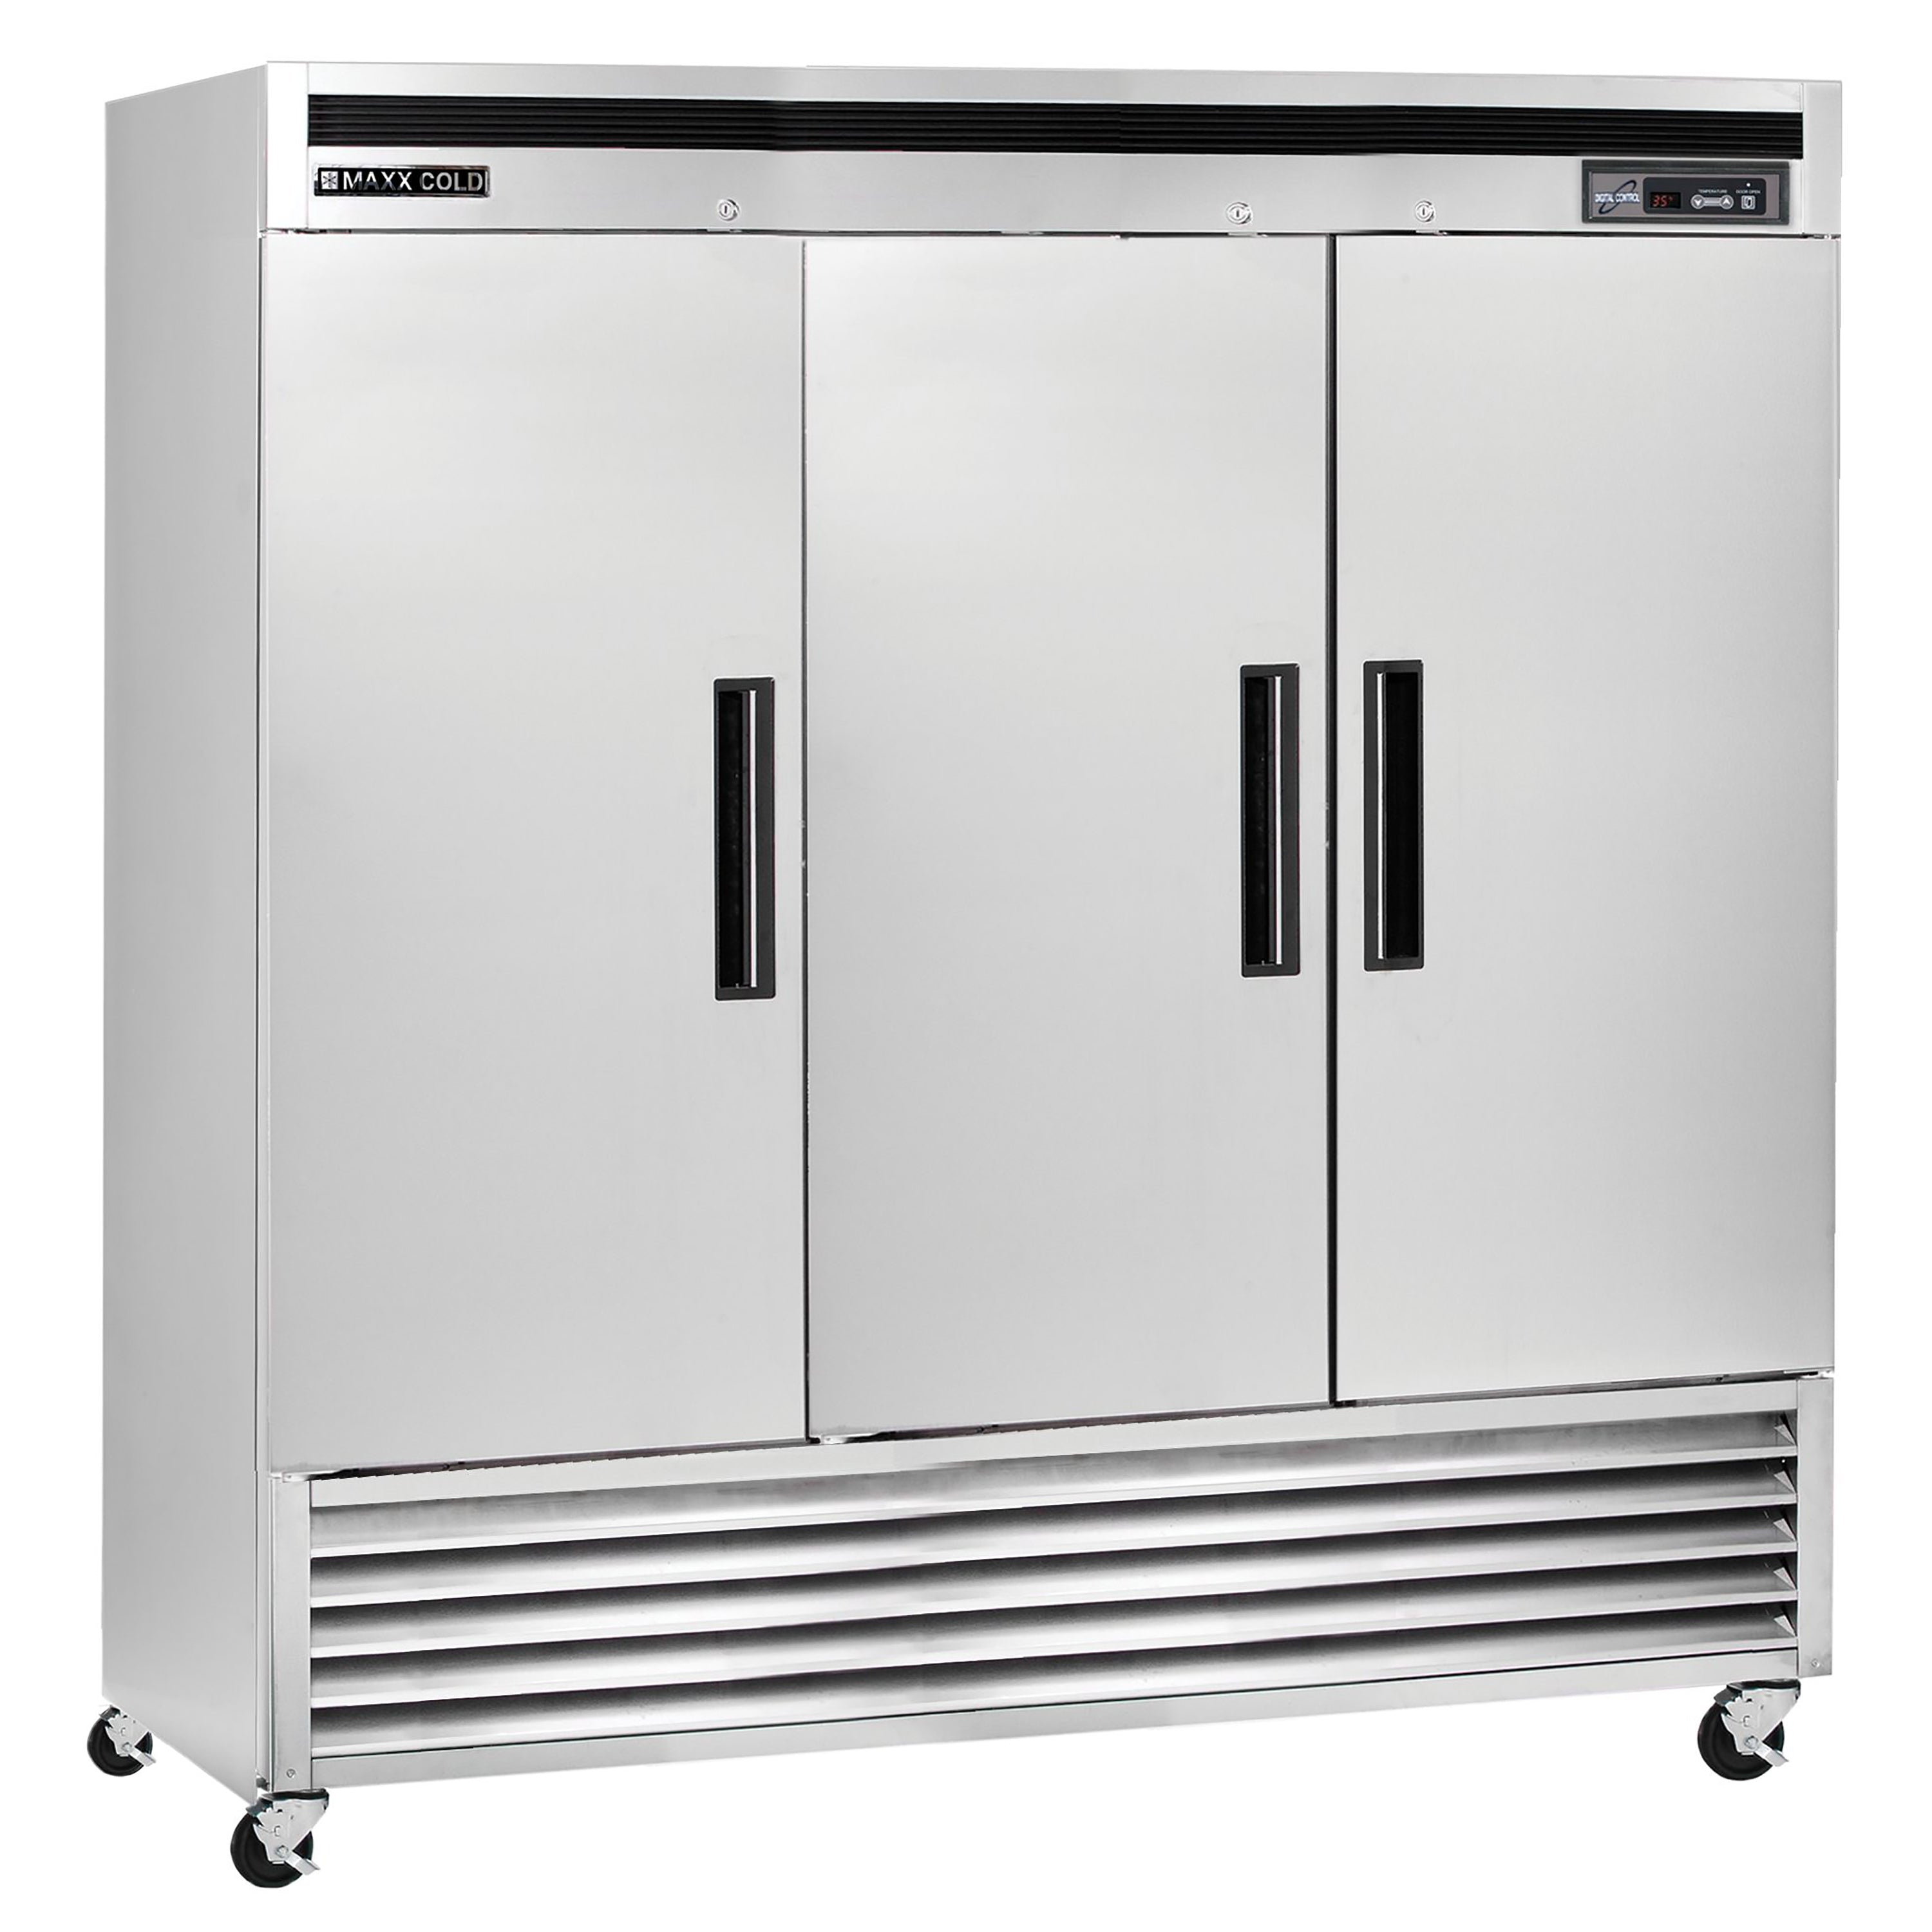 Maxx Cold - MCR-72FDHC, Maxx Cold Triple Door Reach-In Refrigerator, Bottom Mount, 81"W, 72 cu. ft. Storage Capacity, Energy Star Rated, in Stainless Steel